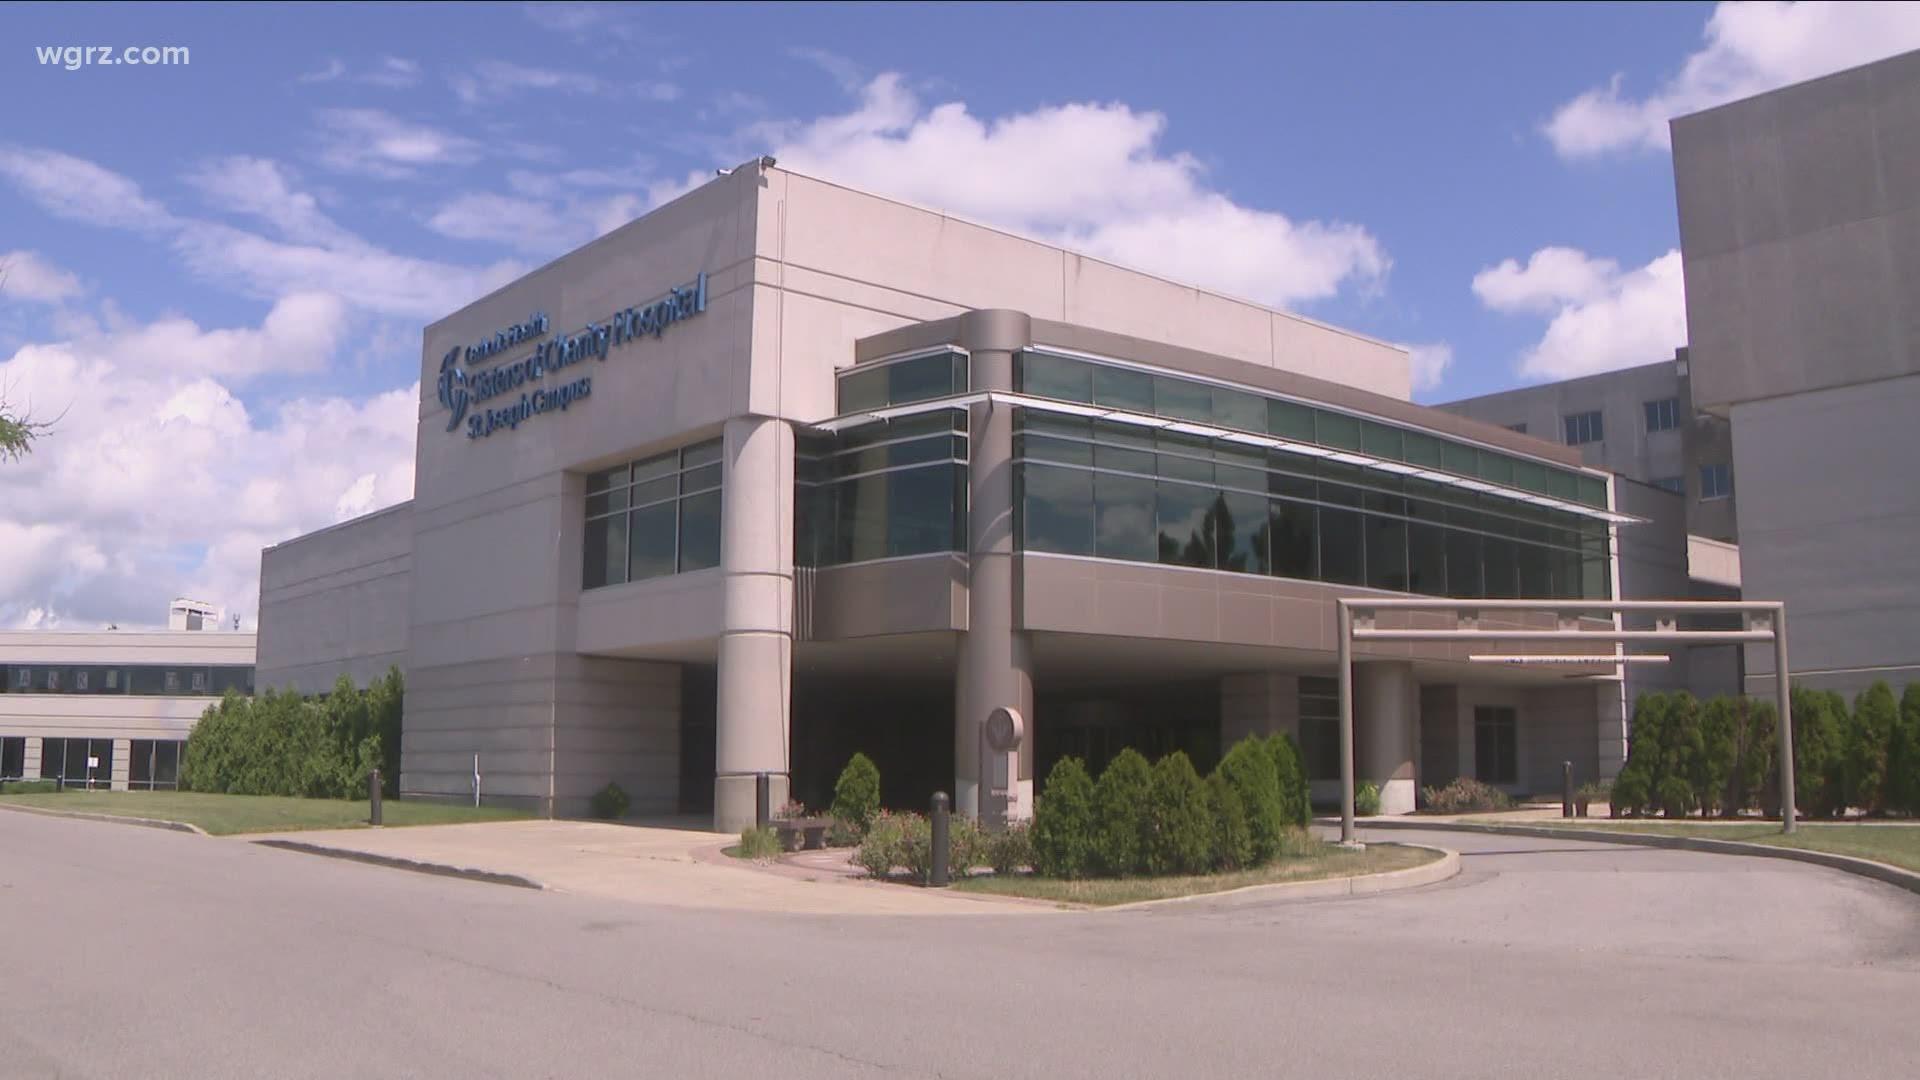 Due to a sharp decrease in the number of Covid-19 patients requiring hospital care, Catholic Health says it's ready to resume offering other types of services.